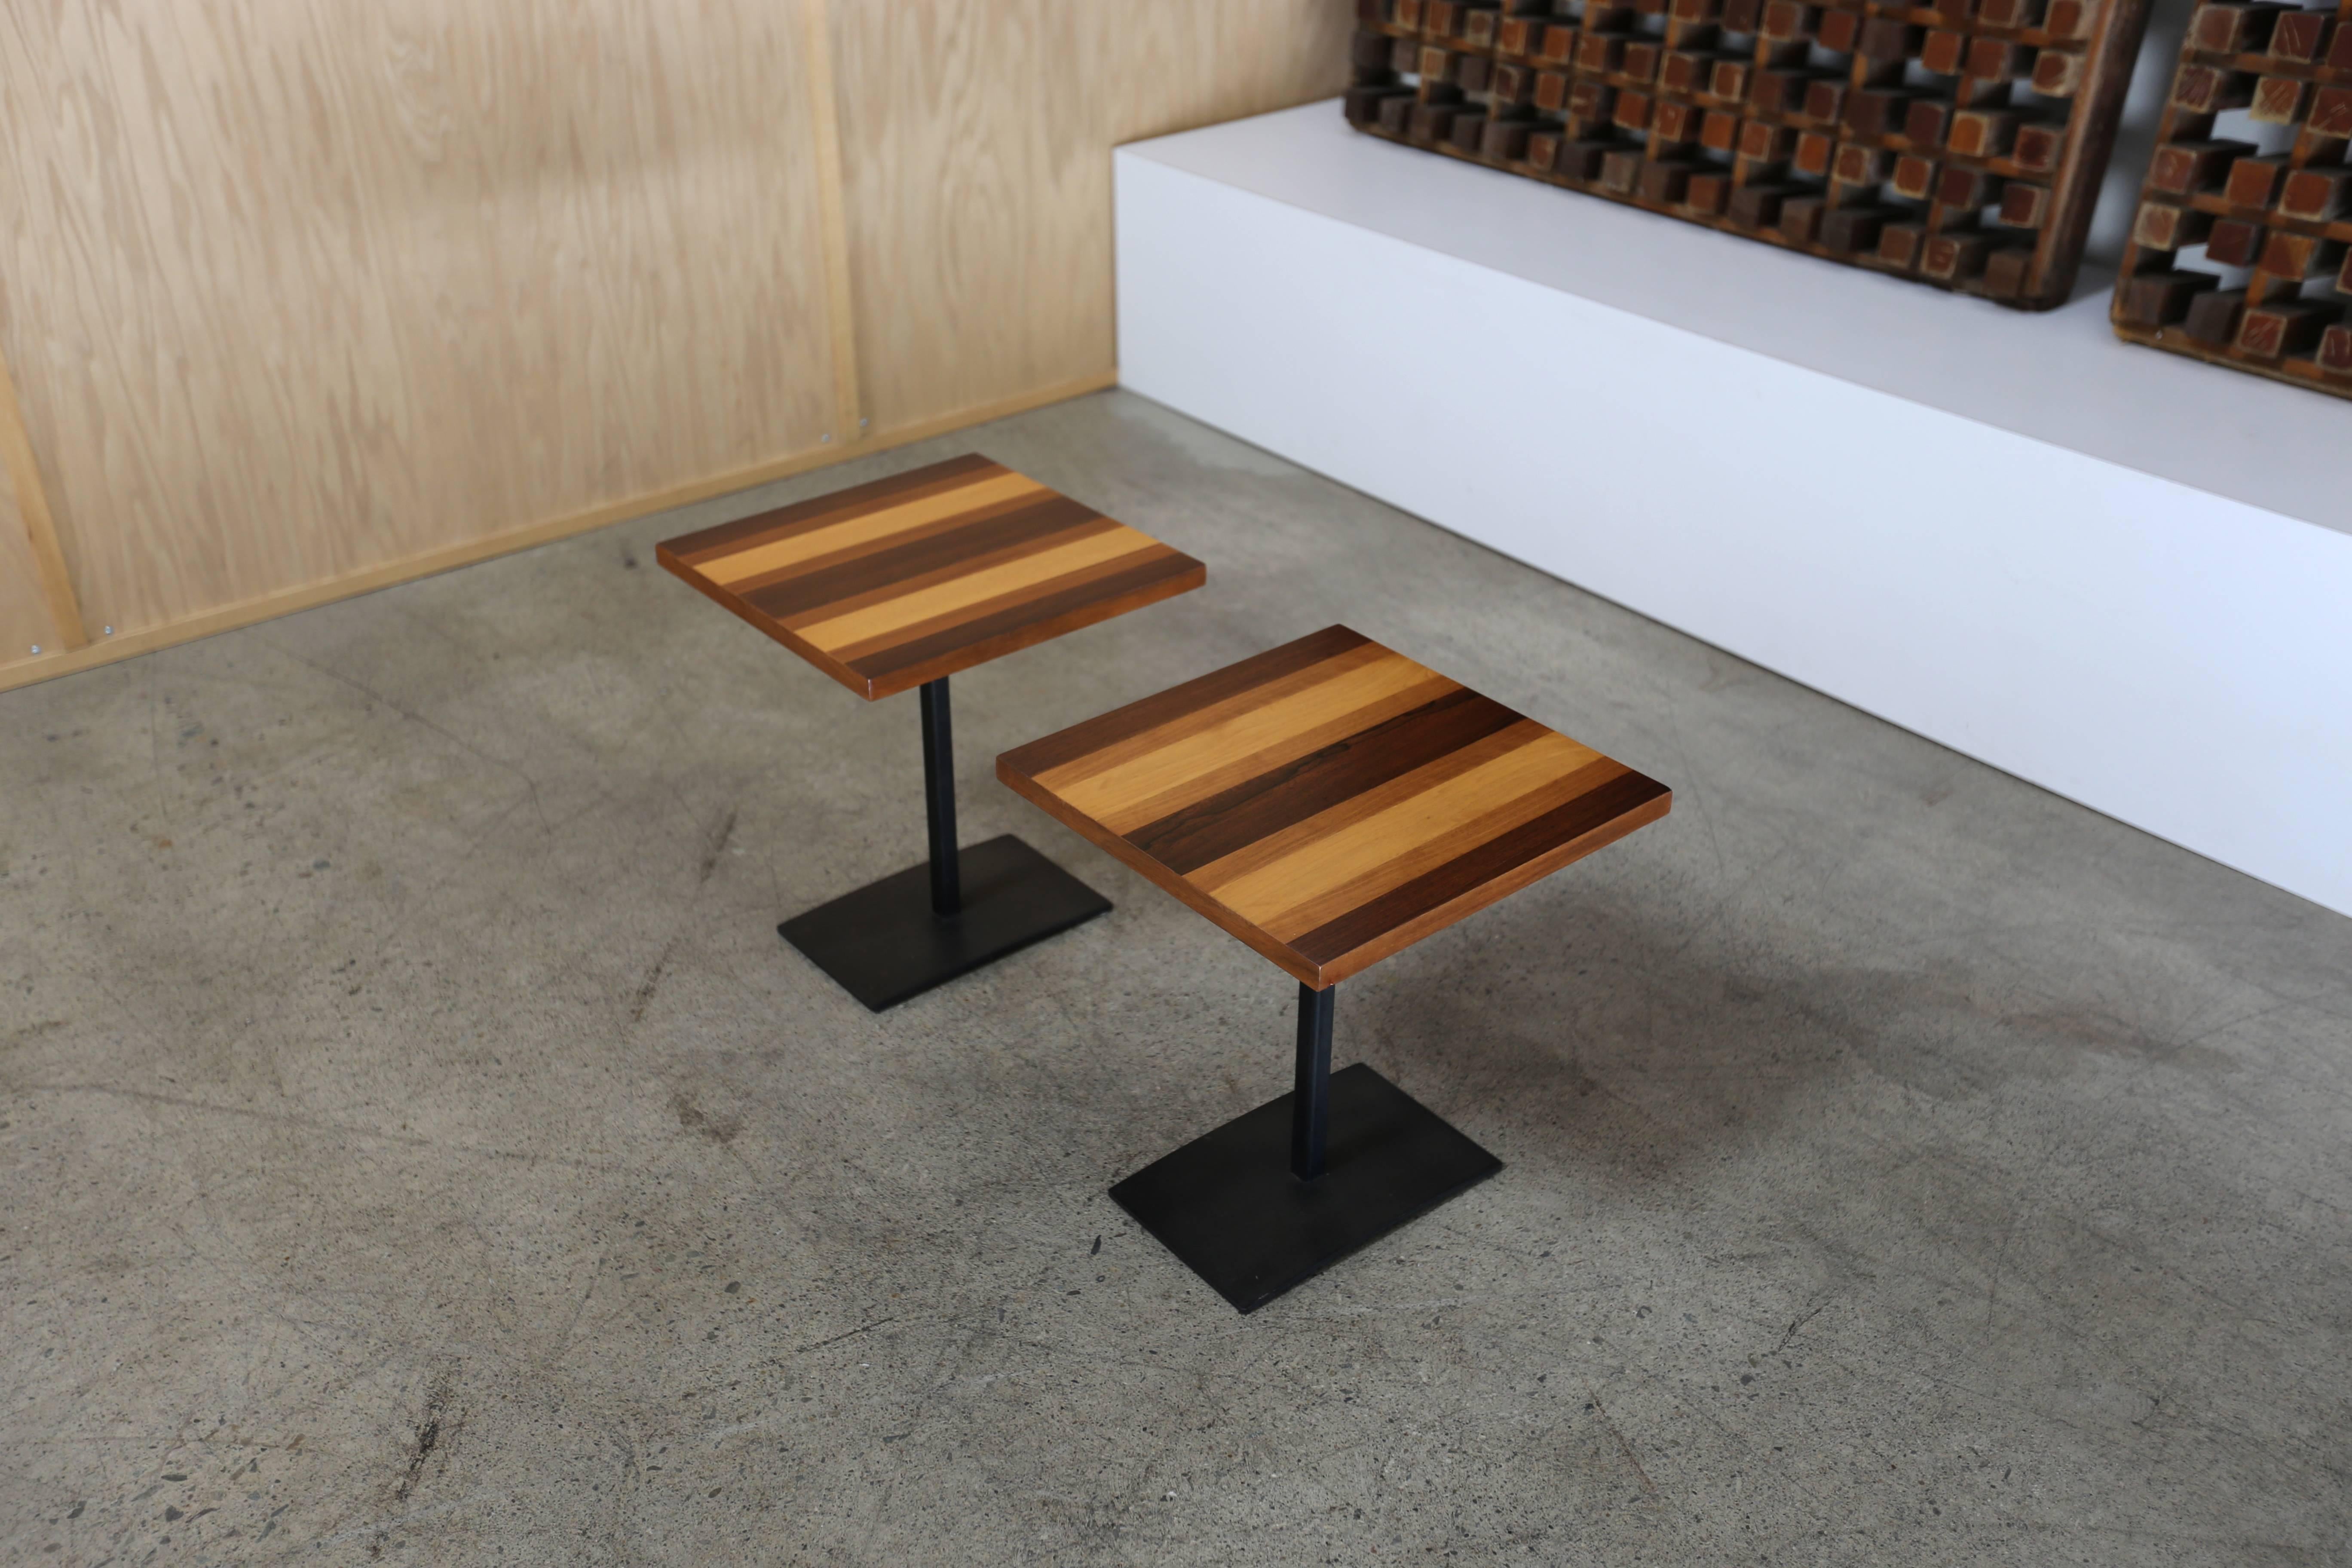 Pair of occasional tables by Milo Baughman for Thayer Coggin.